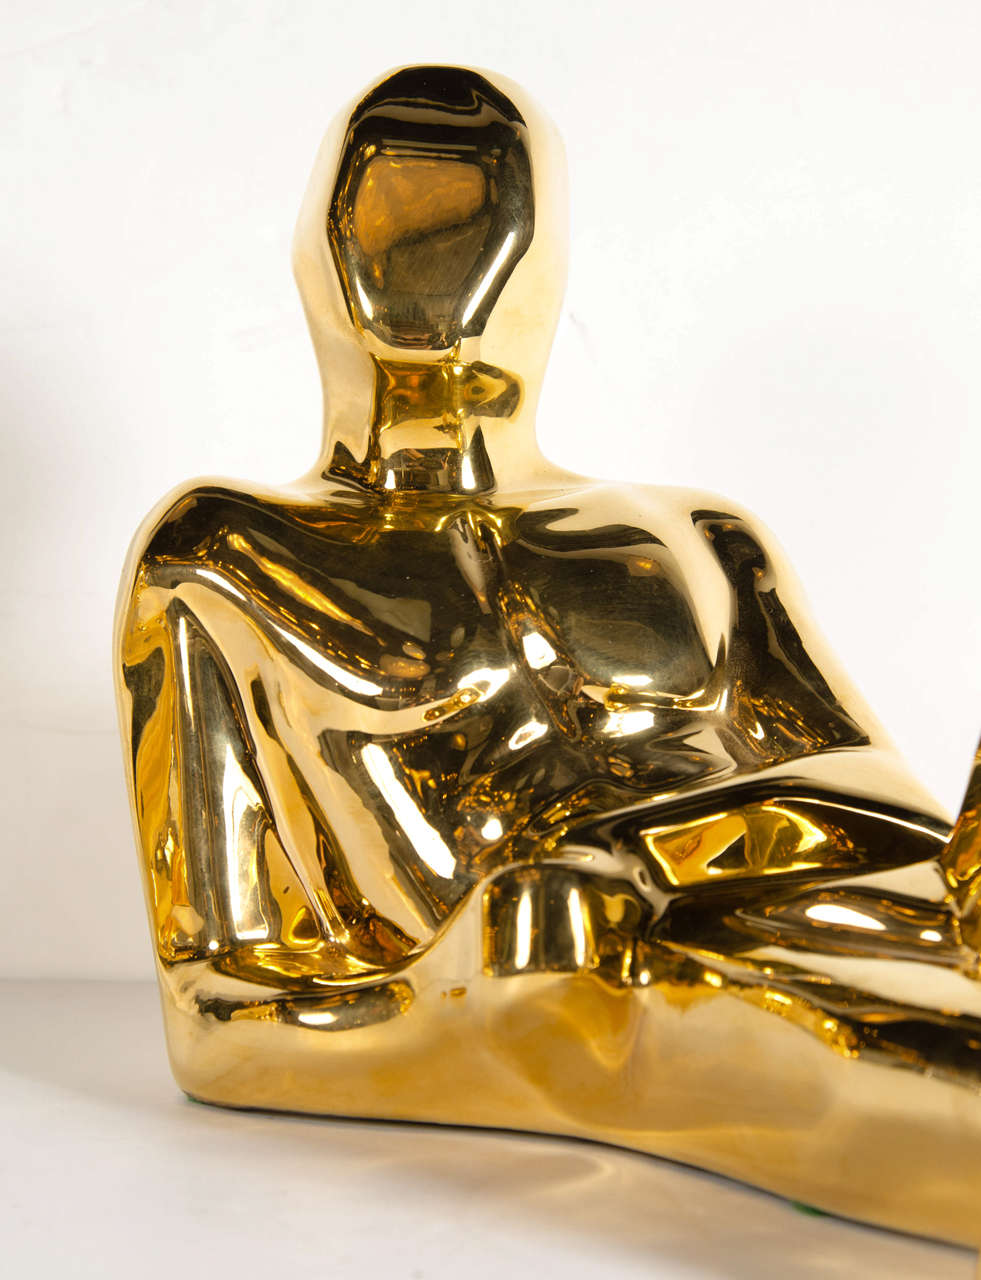 American Modernist Ceramic Gold-Plated Reclining Man Sculpture by Jaru For Sale